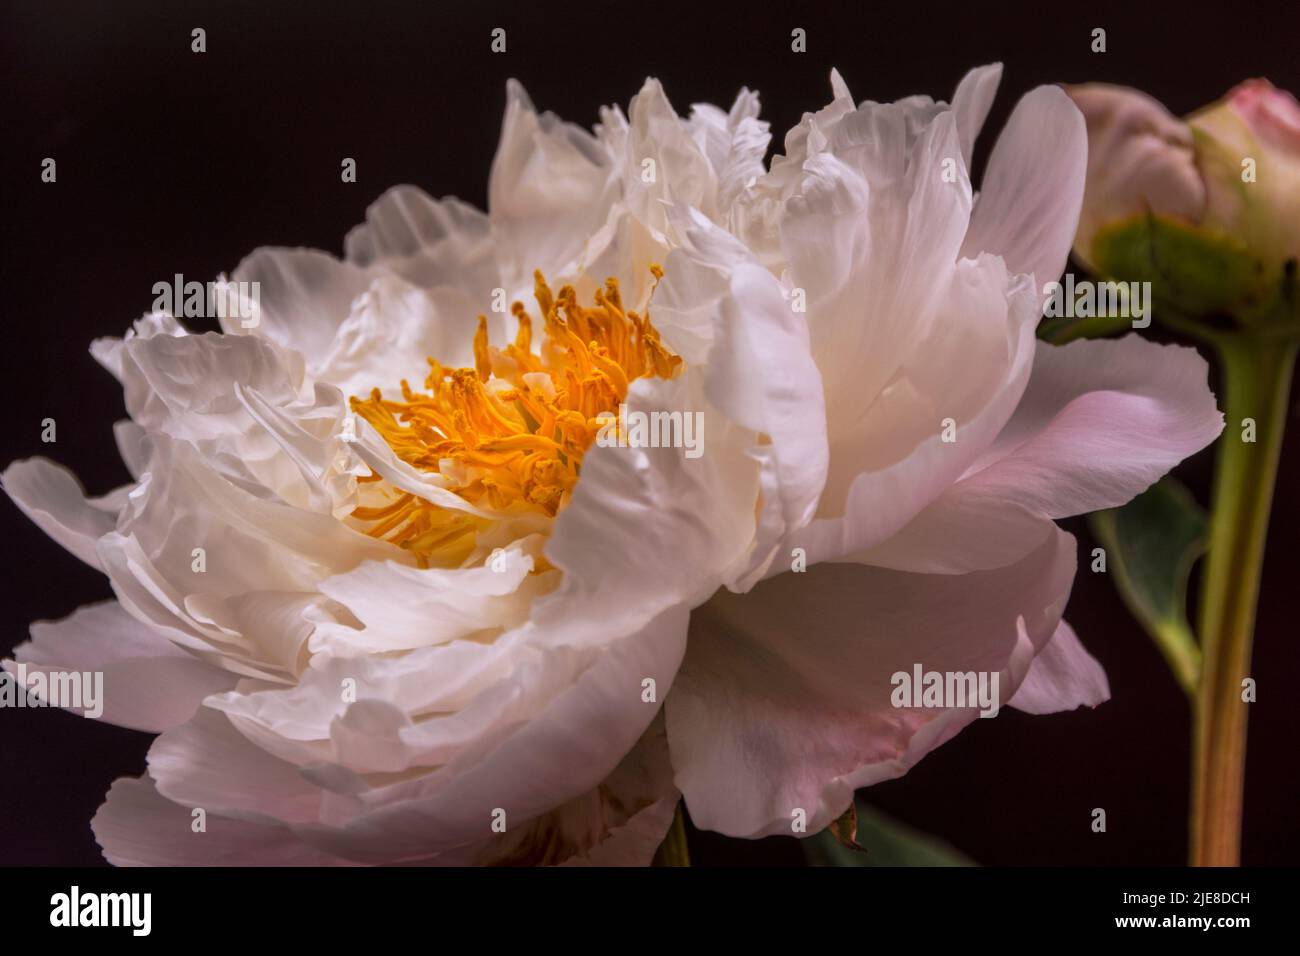 A single pale pink peony with a bud. The main flower is fully open showing the internal structure and stamens Stock Photo